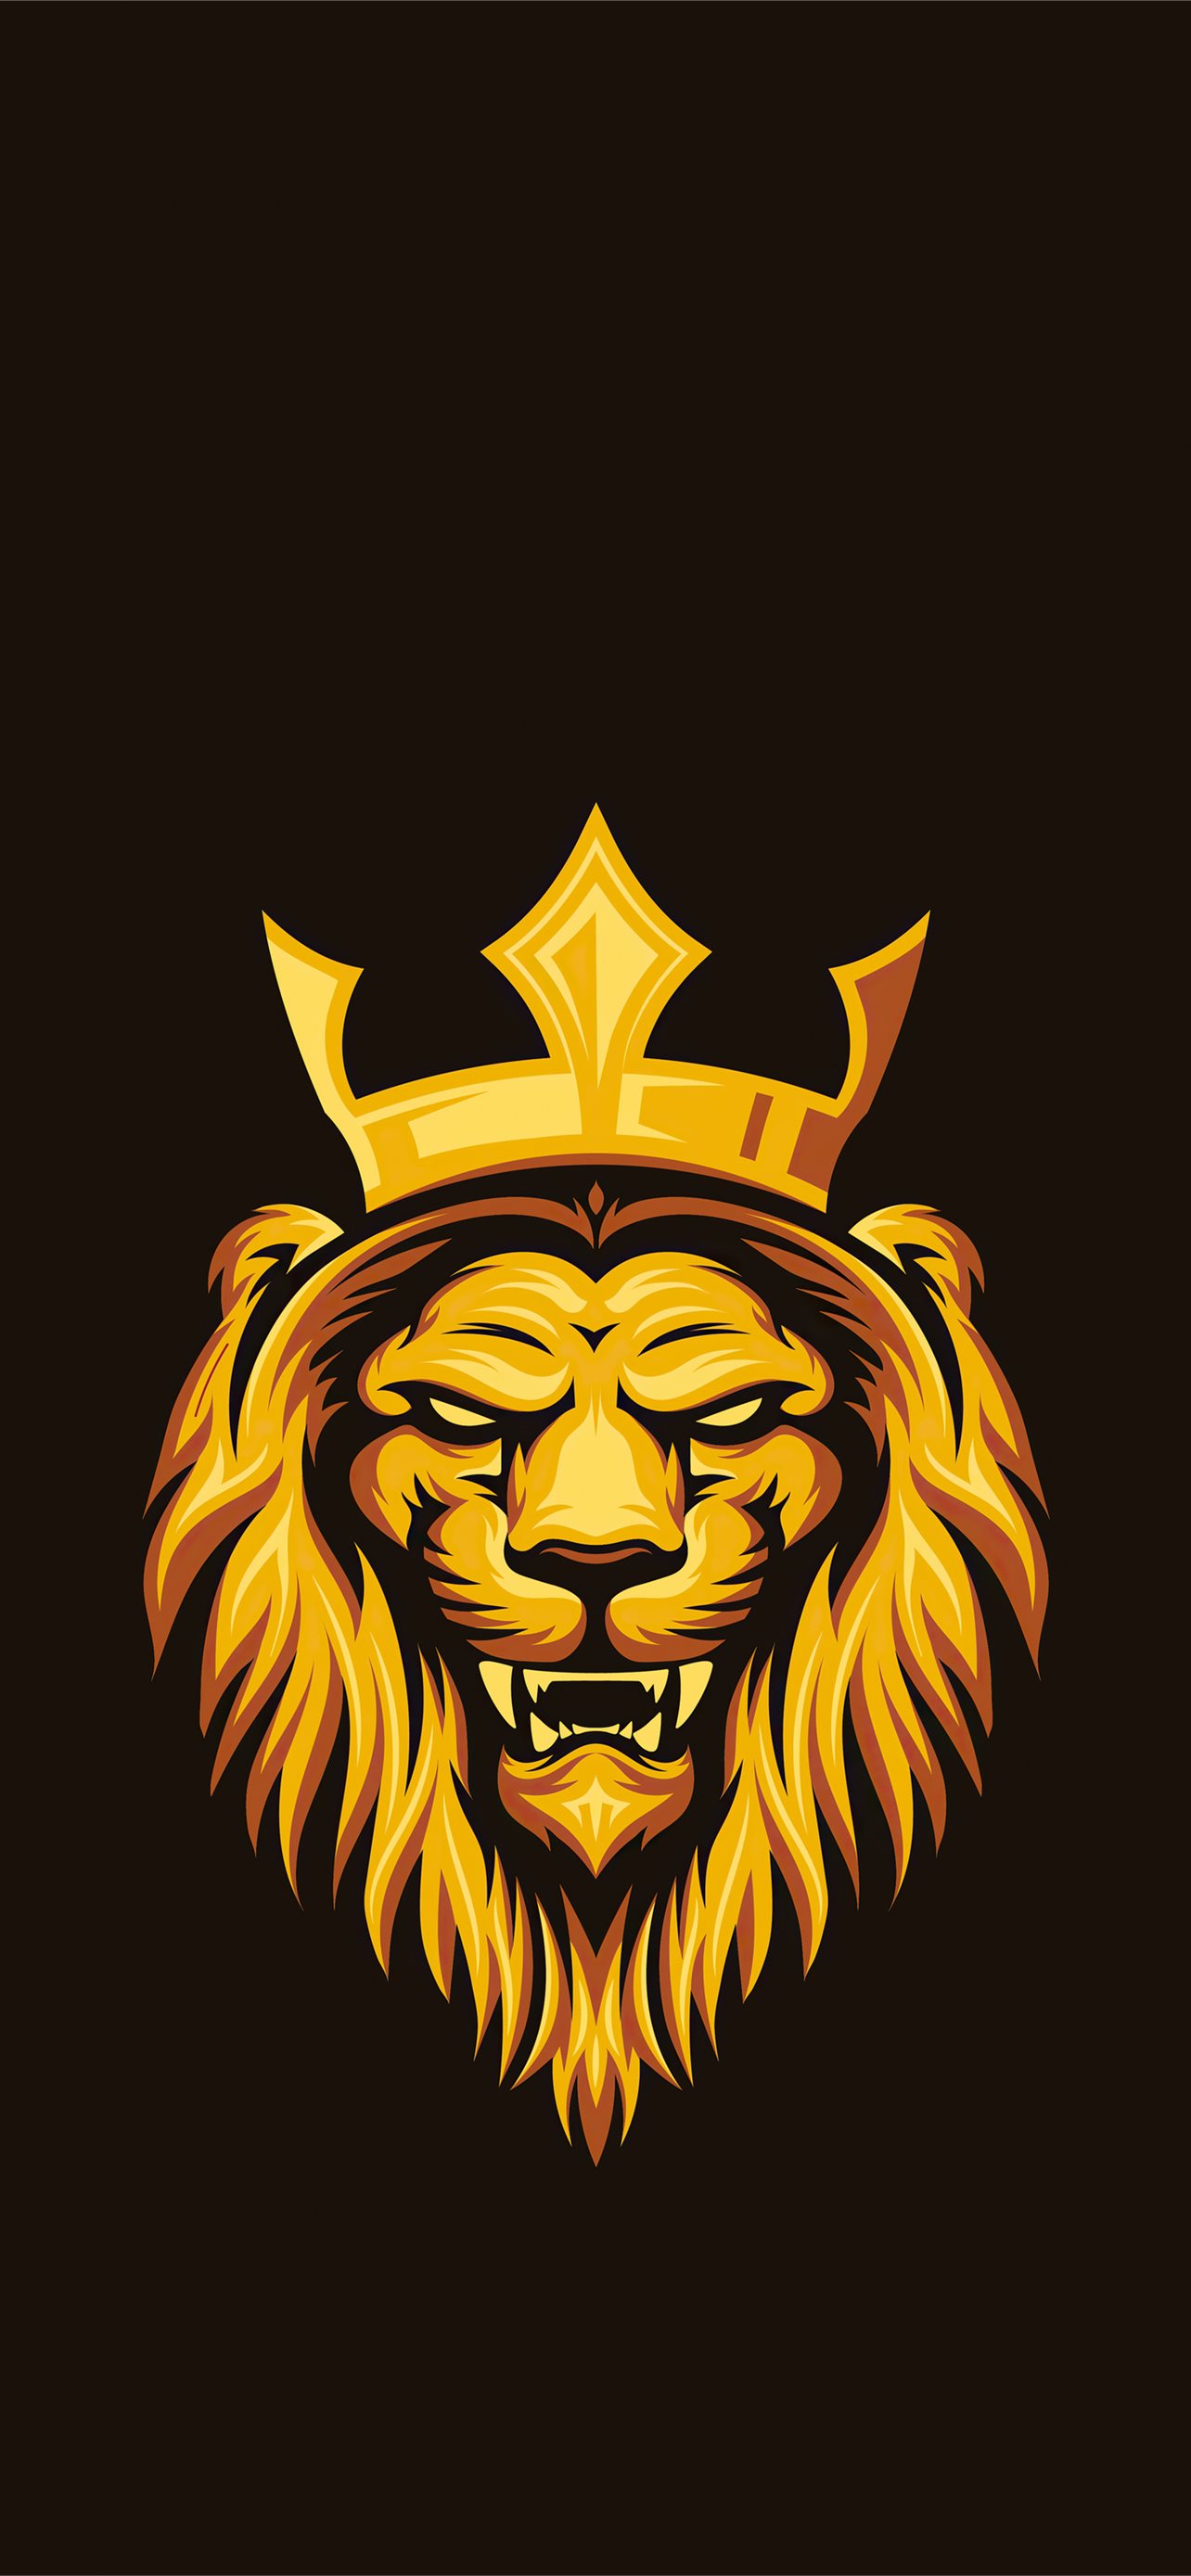 Amazing Lion Wallpapers